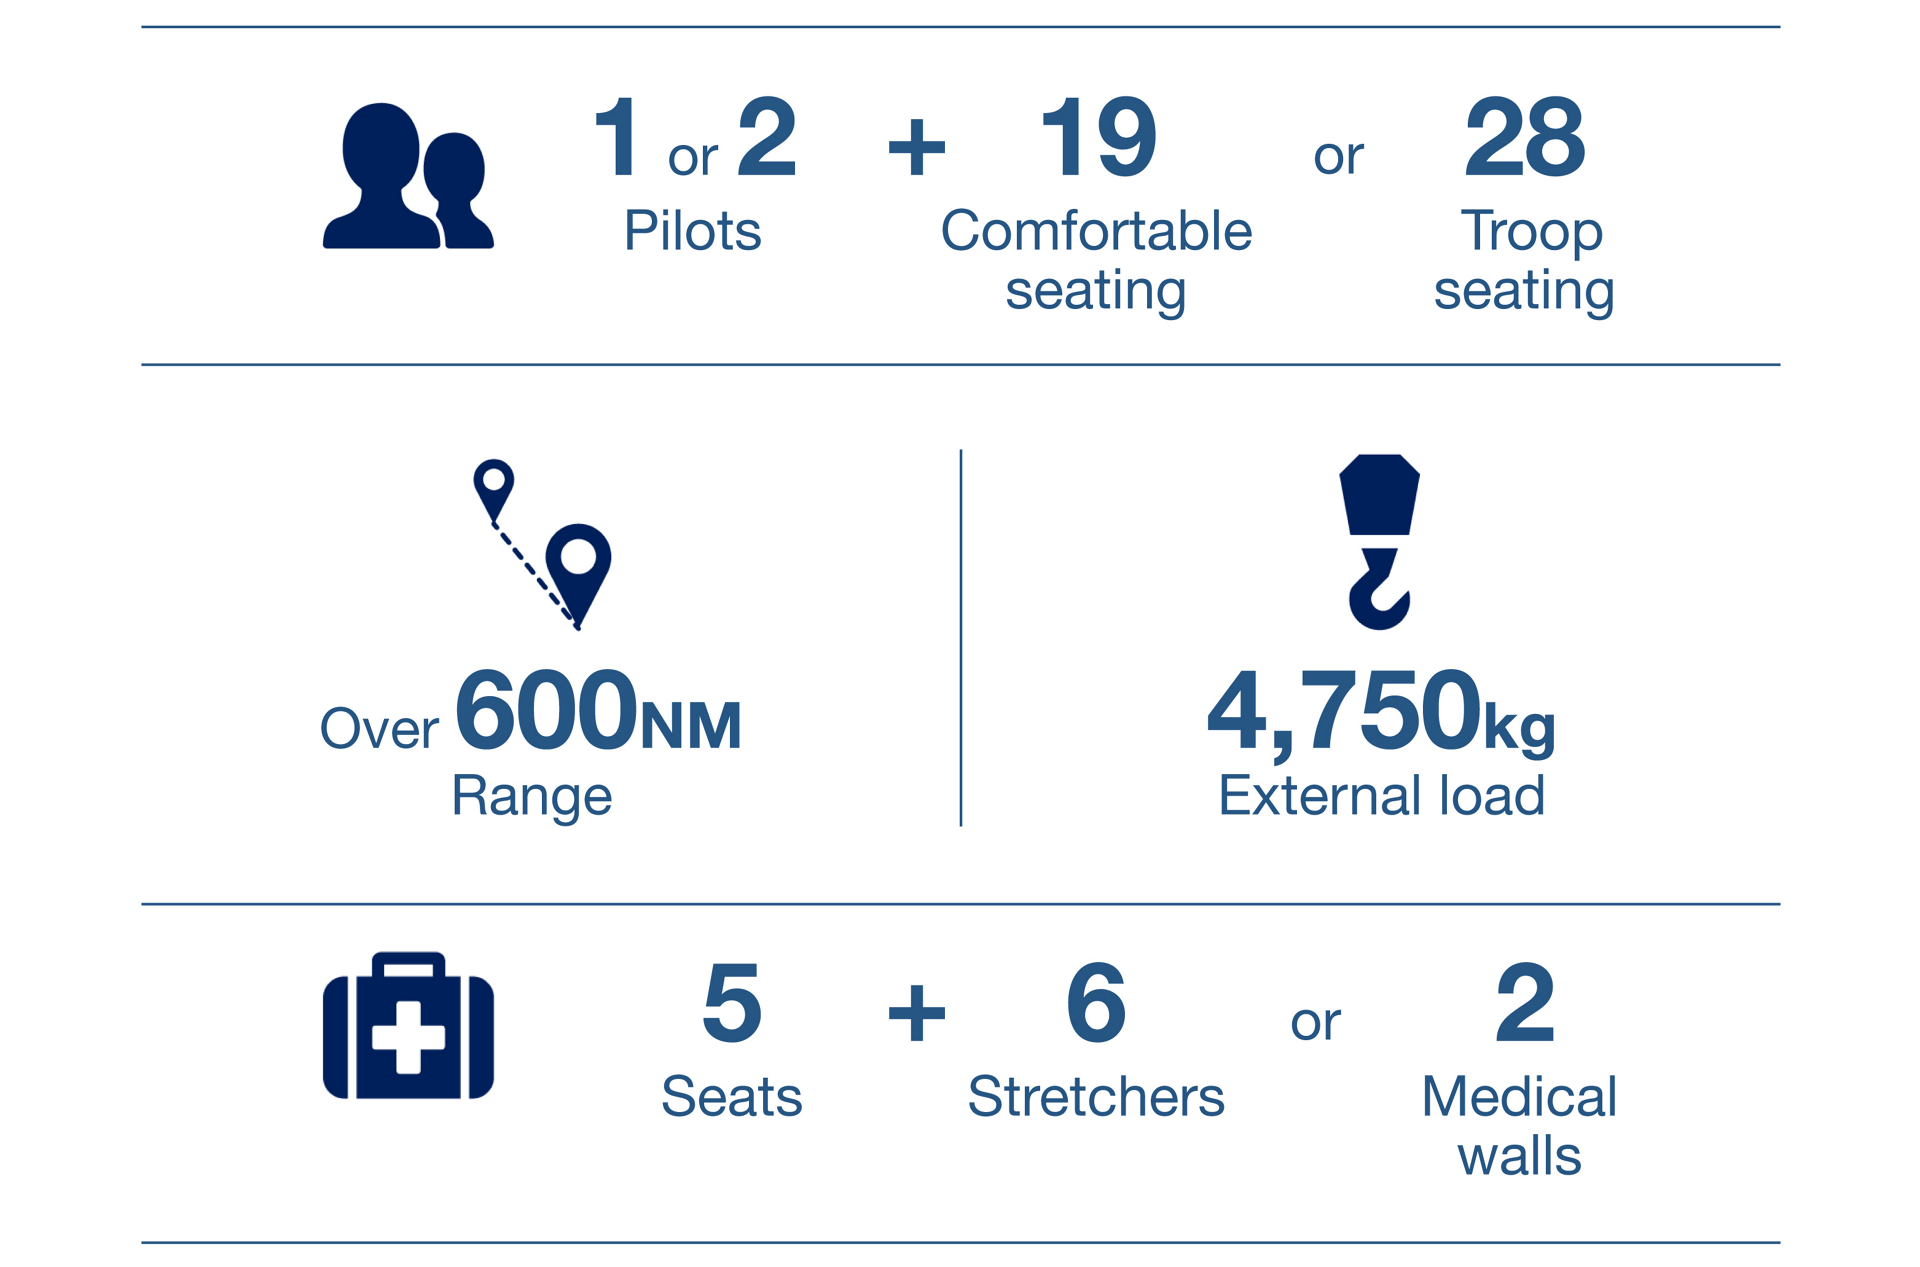 An infographic showing key performance metrics and capabilities for Airbus’ H225 helicopter.